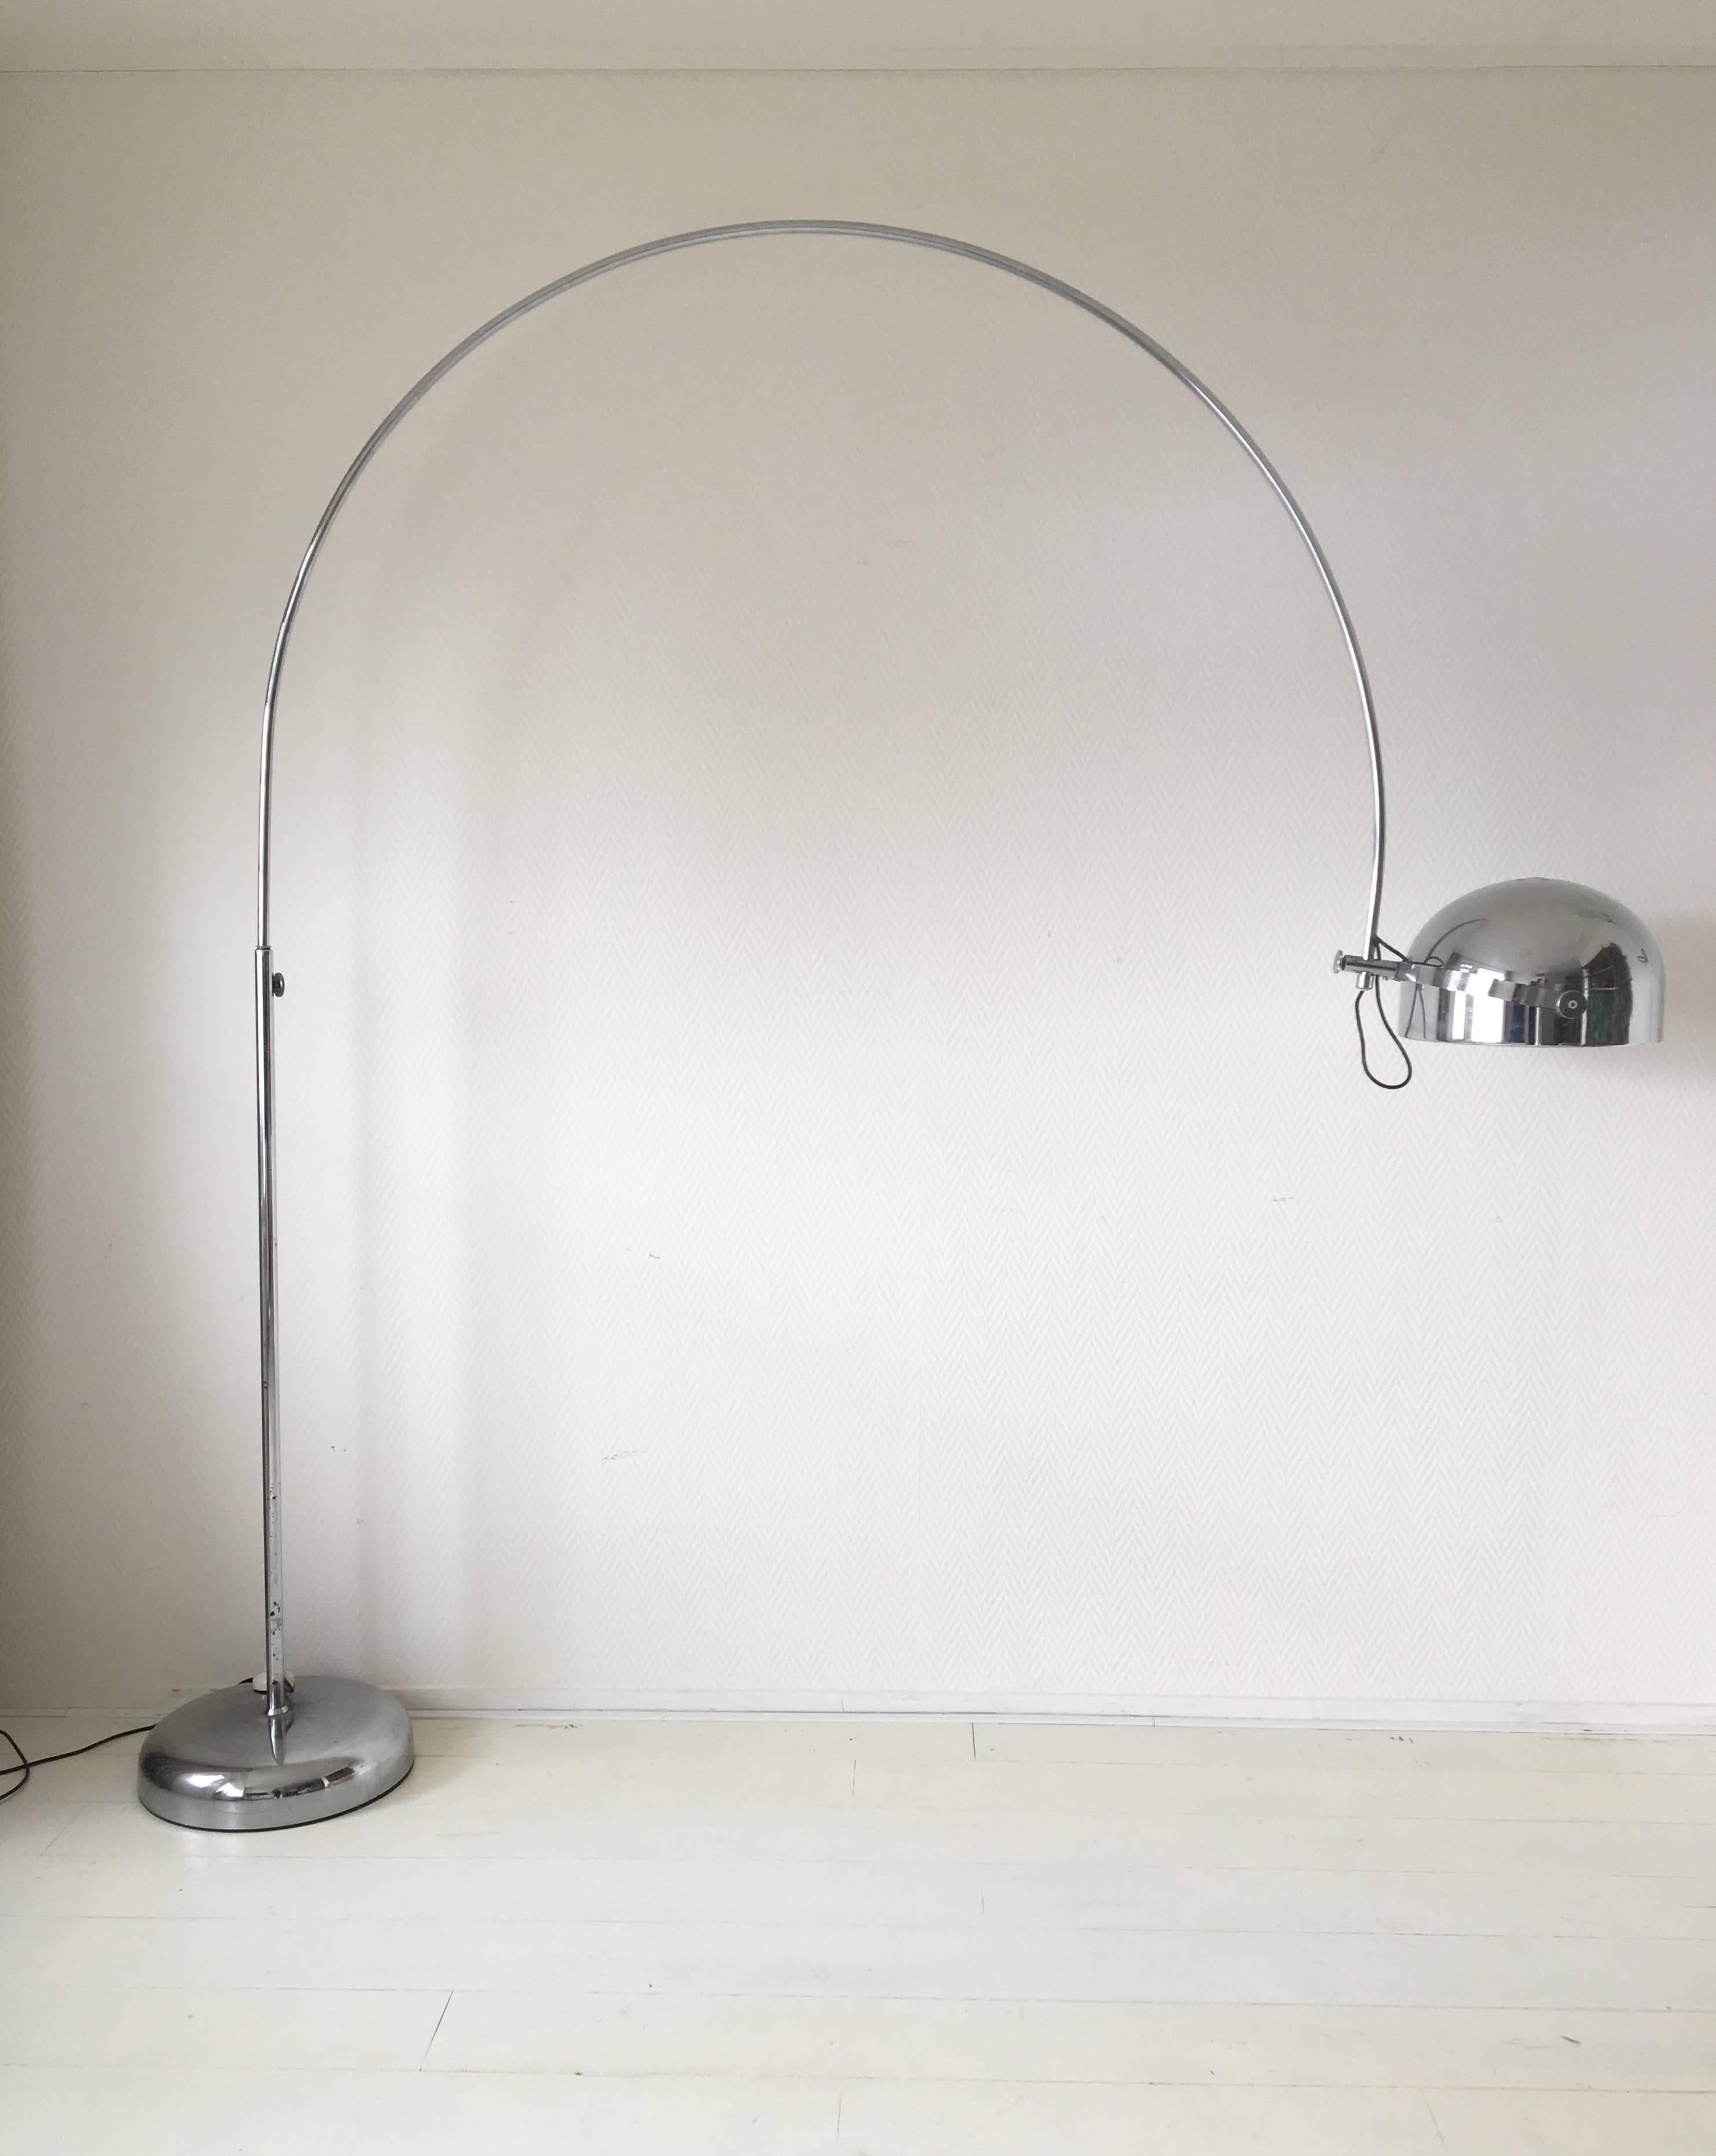 This large midcentury lamp was manufactured by Gepo Amsterdam in the Netherlands, circa 1960s. Most likely it was designed by the Gebroeders Posthuma. The lamp features a heavy chromed metal base which can be rotated 360 degrees. The shade can also